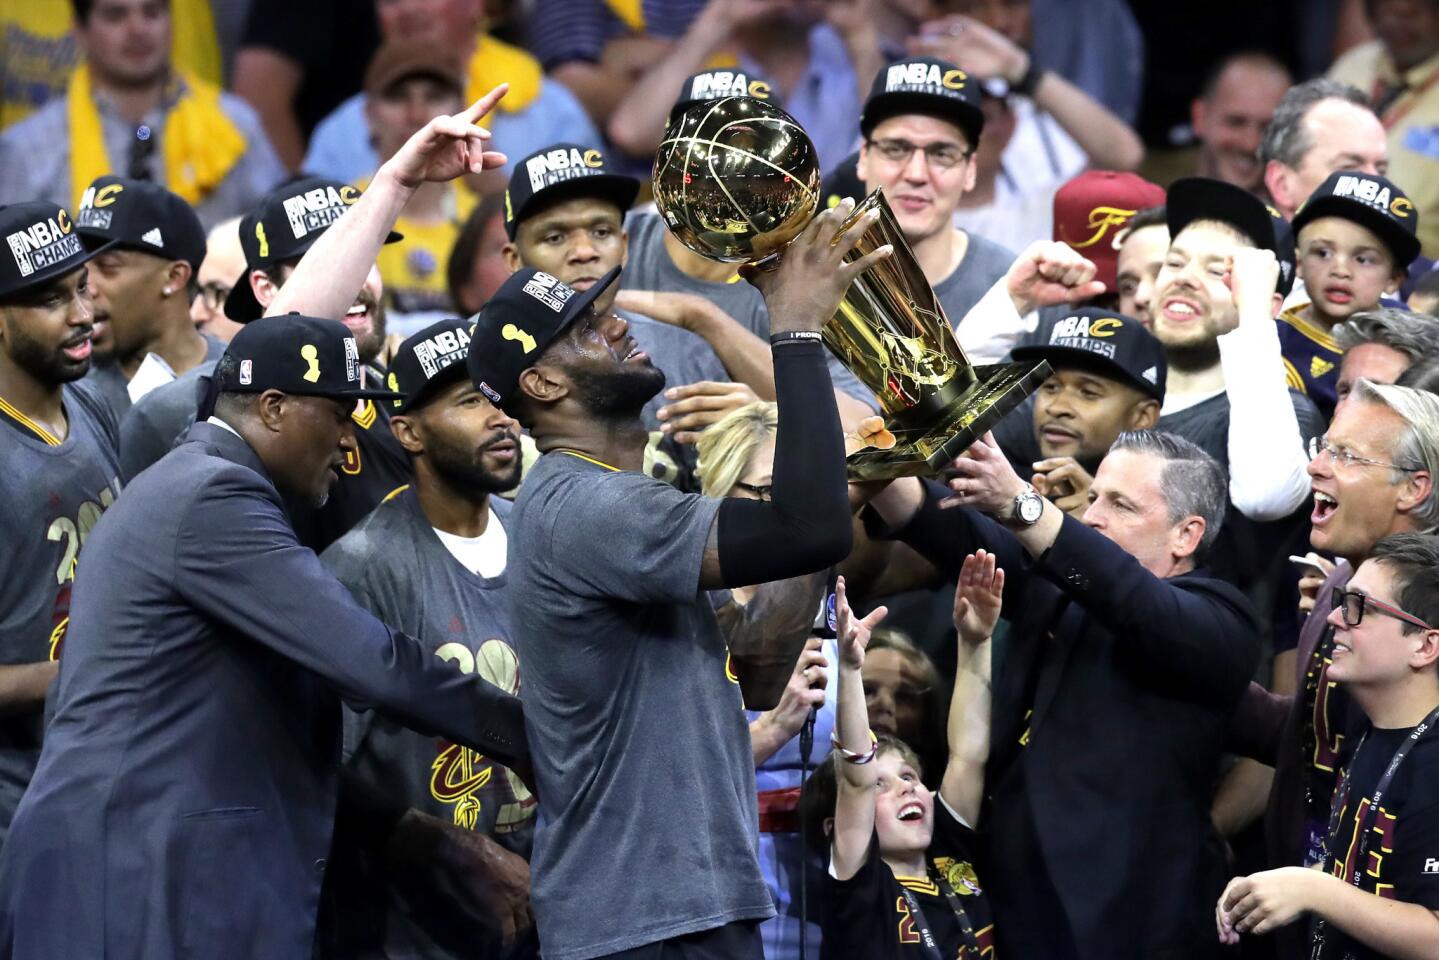 LeBron James holds the Larry O'Brien Championship Trophy after the Cleveland Cavaliers defeated the Golden State Warriors in the NBA Finals at Oracle Arena in Oakland on June 19.